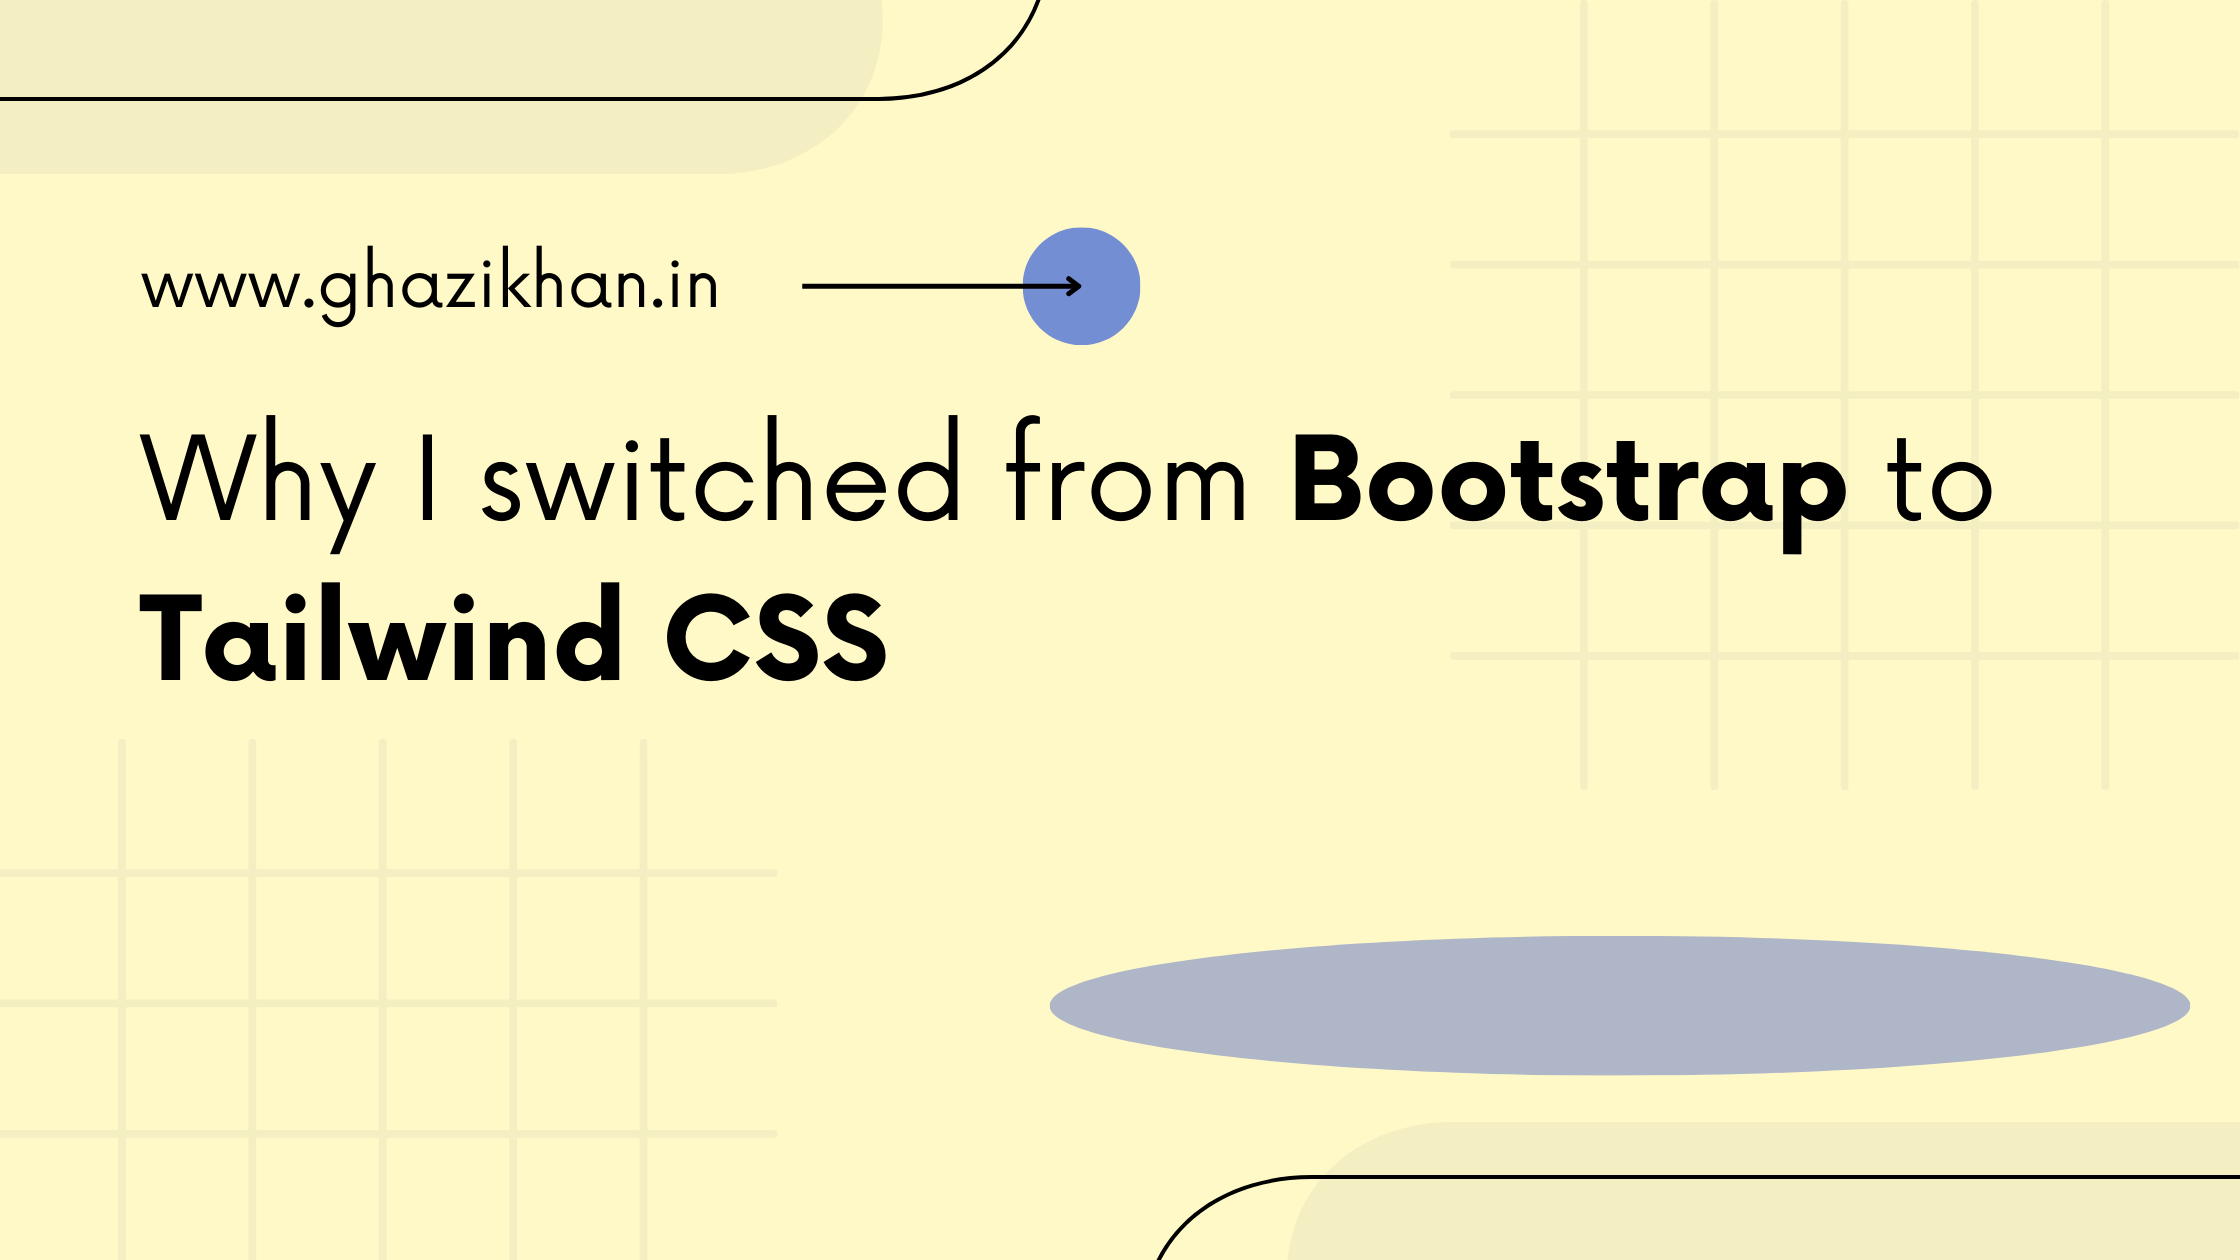 Why I switched from Bootstrap to Tailwind CSS